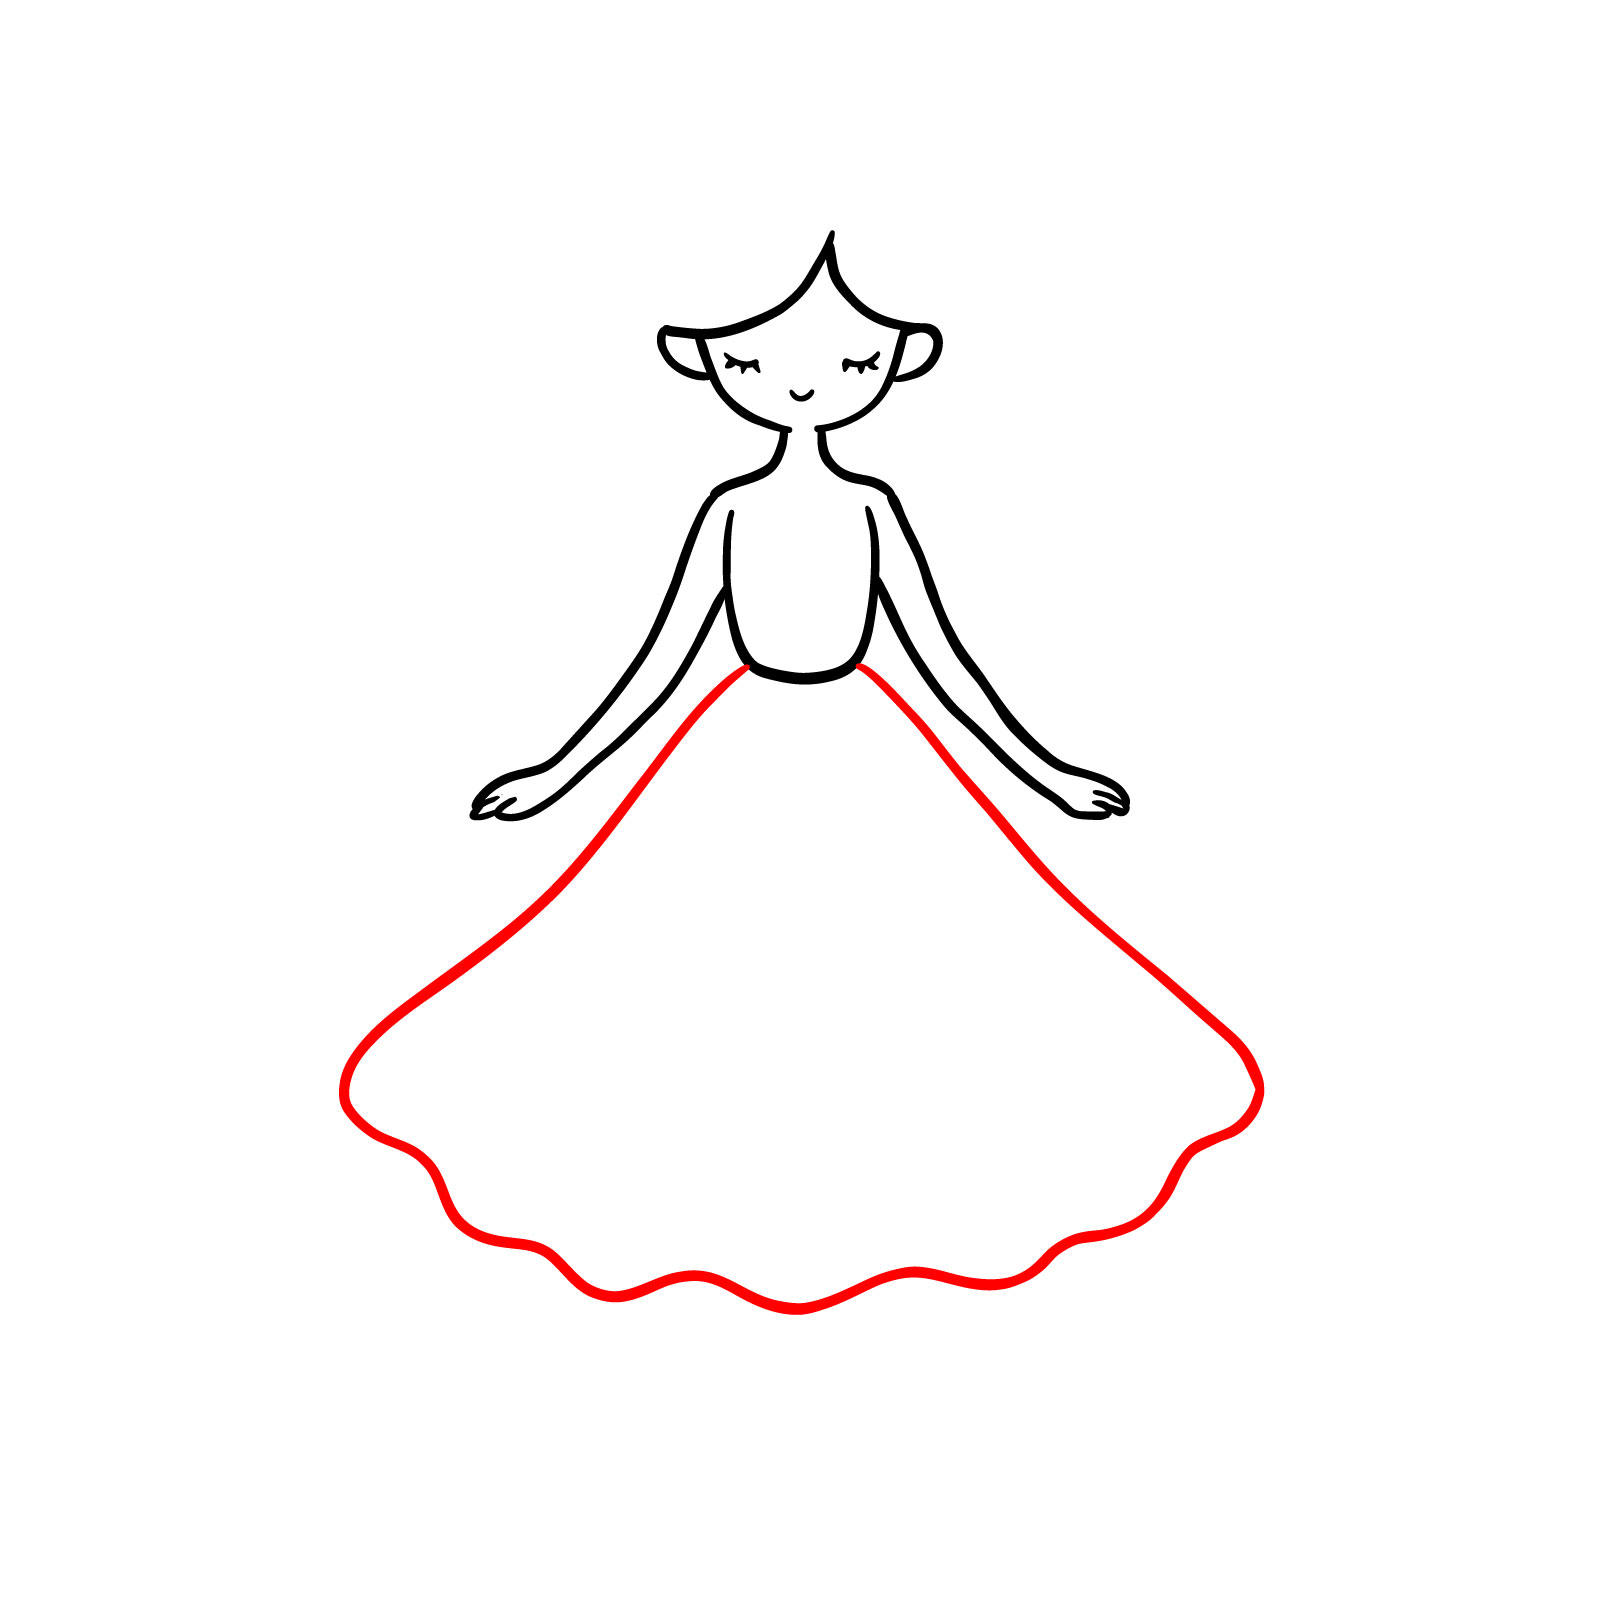 Fairy drawing - lines added below the torso to create a flowing skirt - step 06